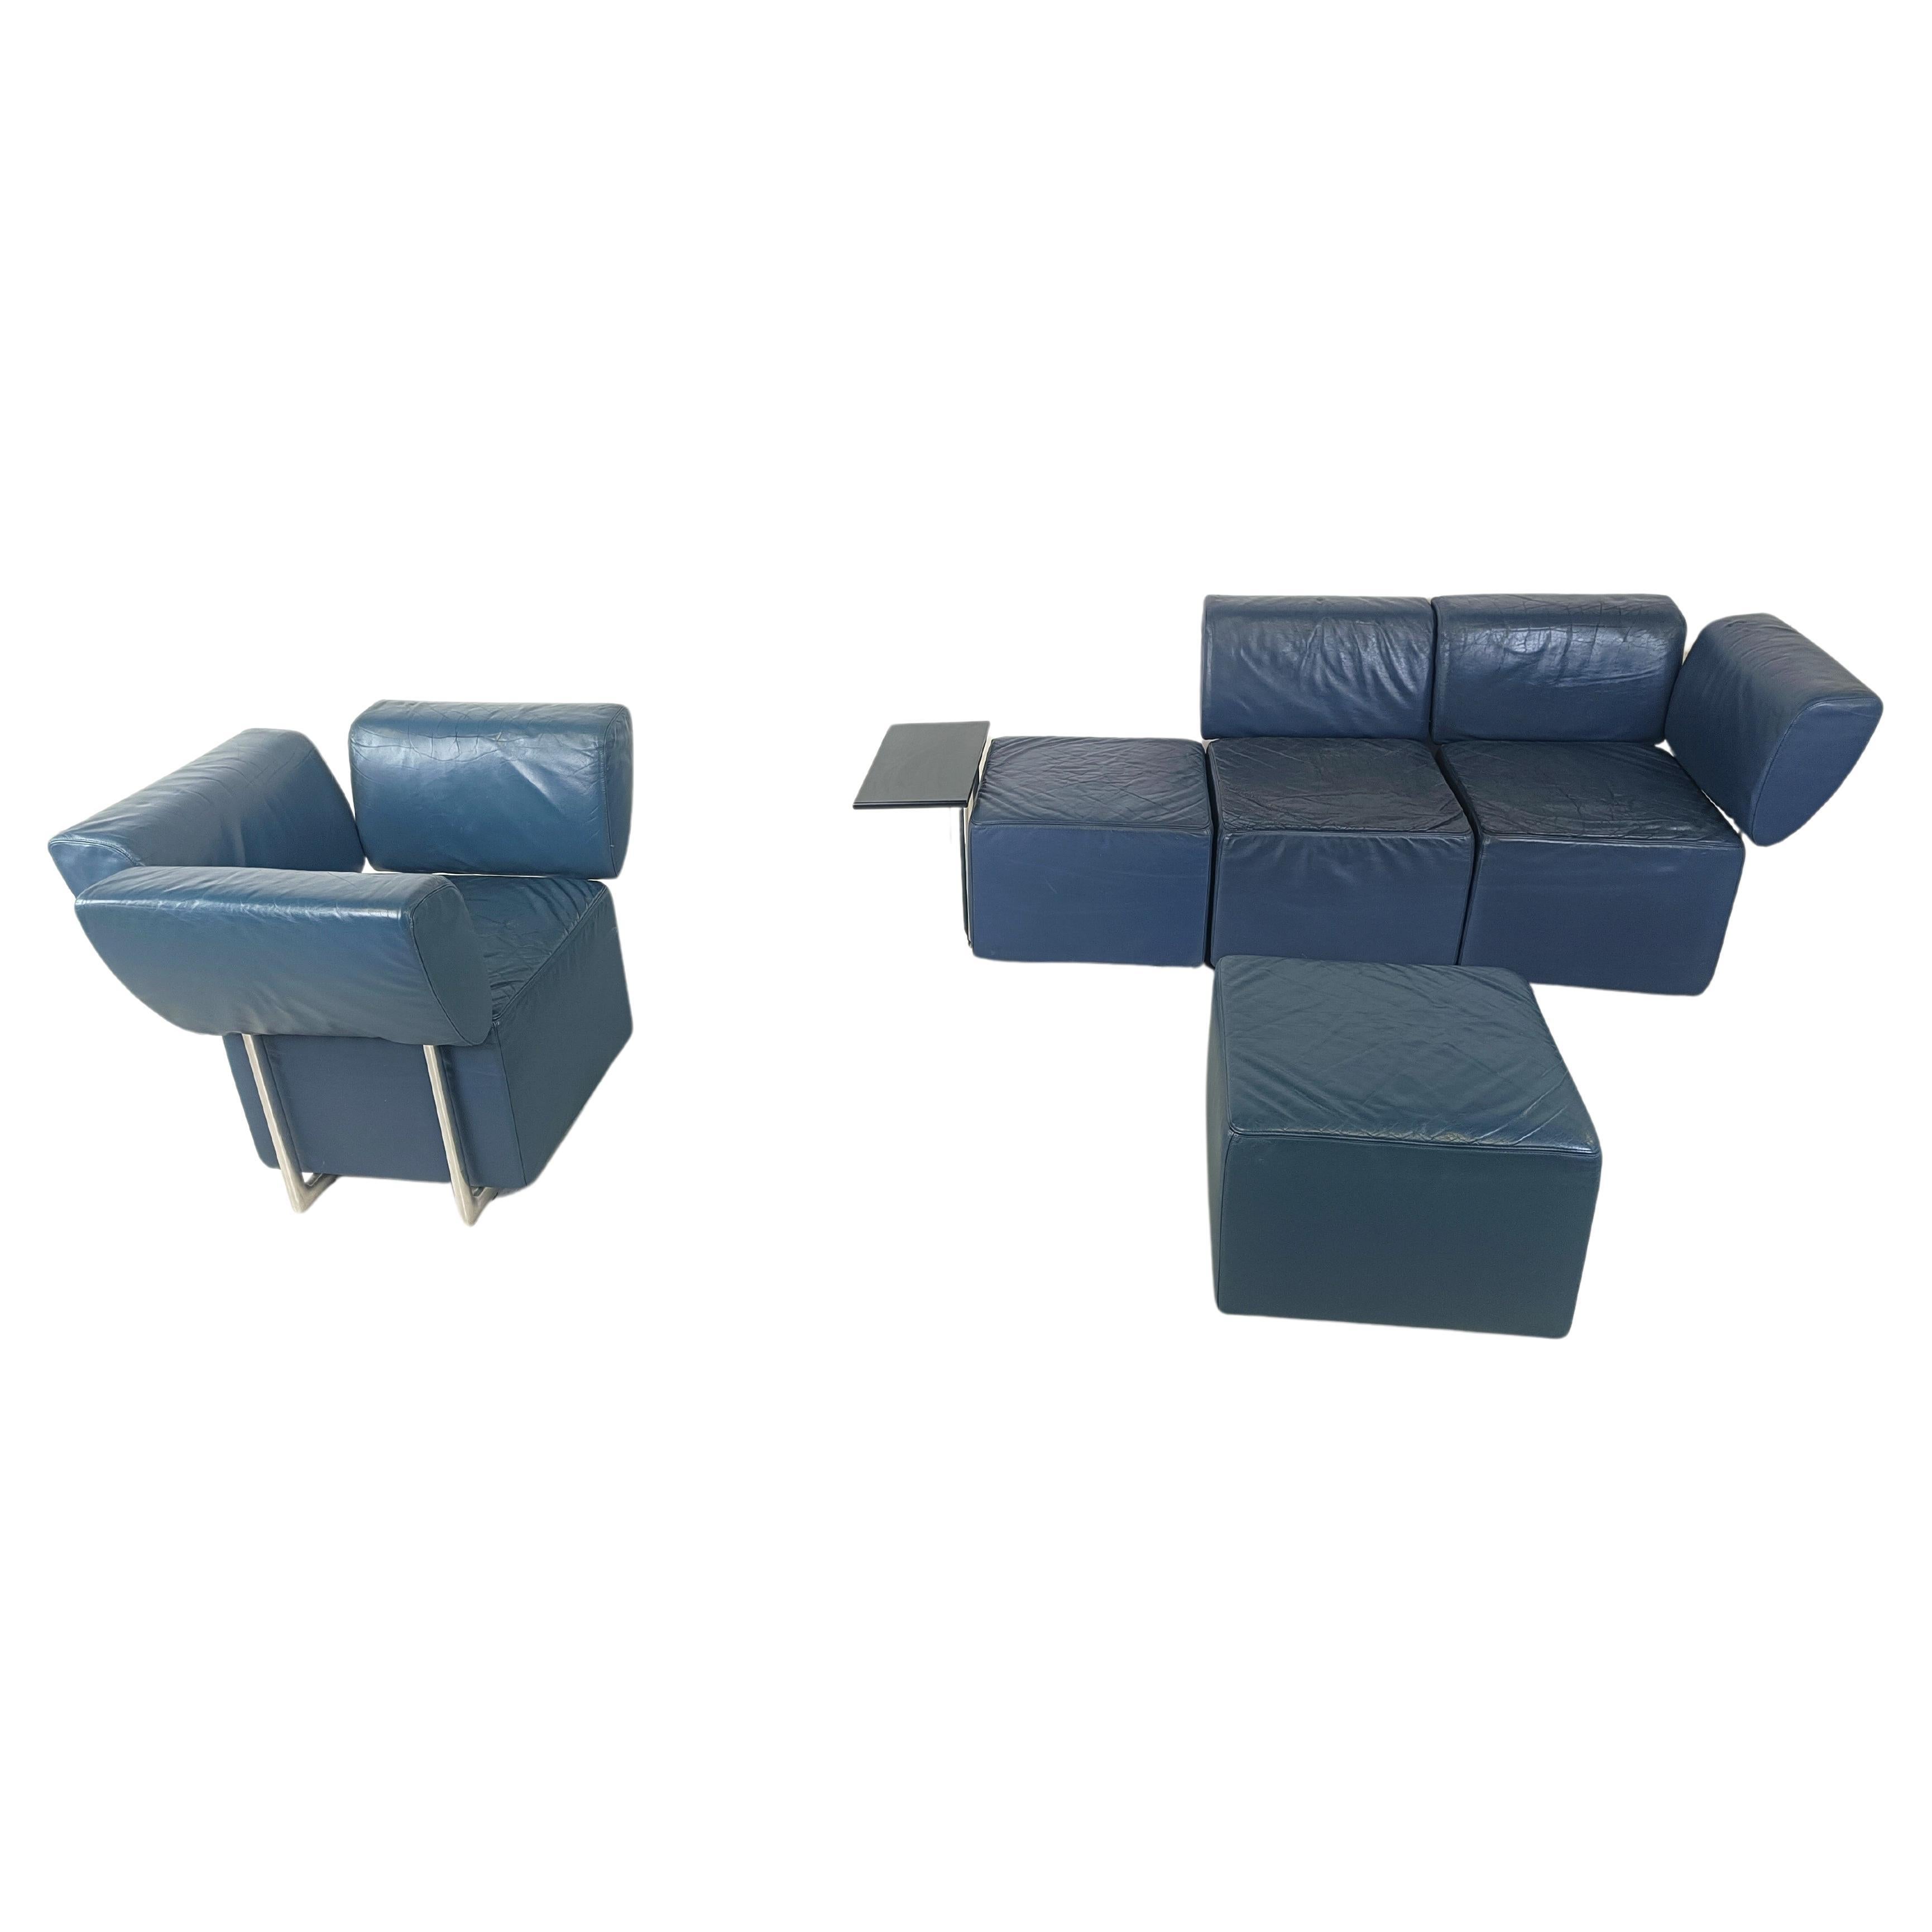 Postmodern Clou sofa by Cor, 1990s For Sale